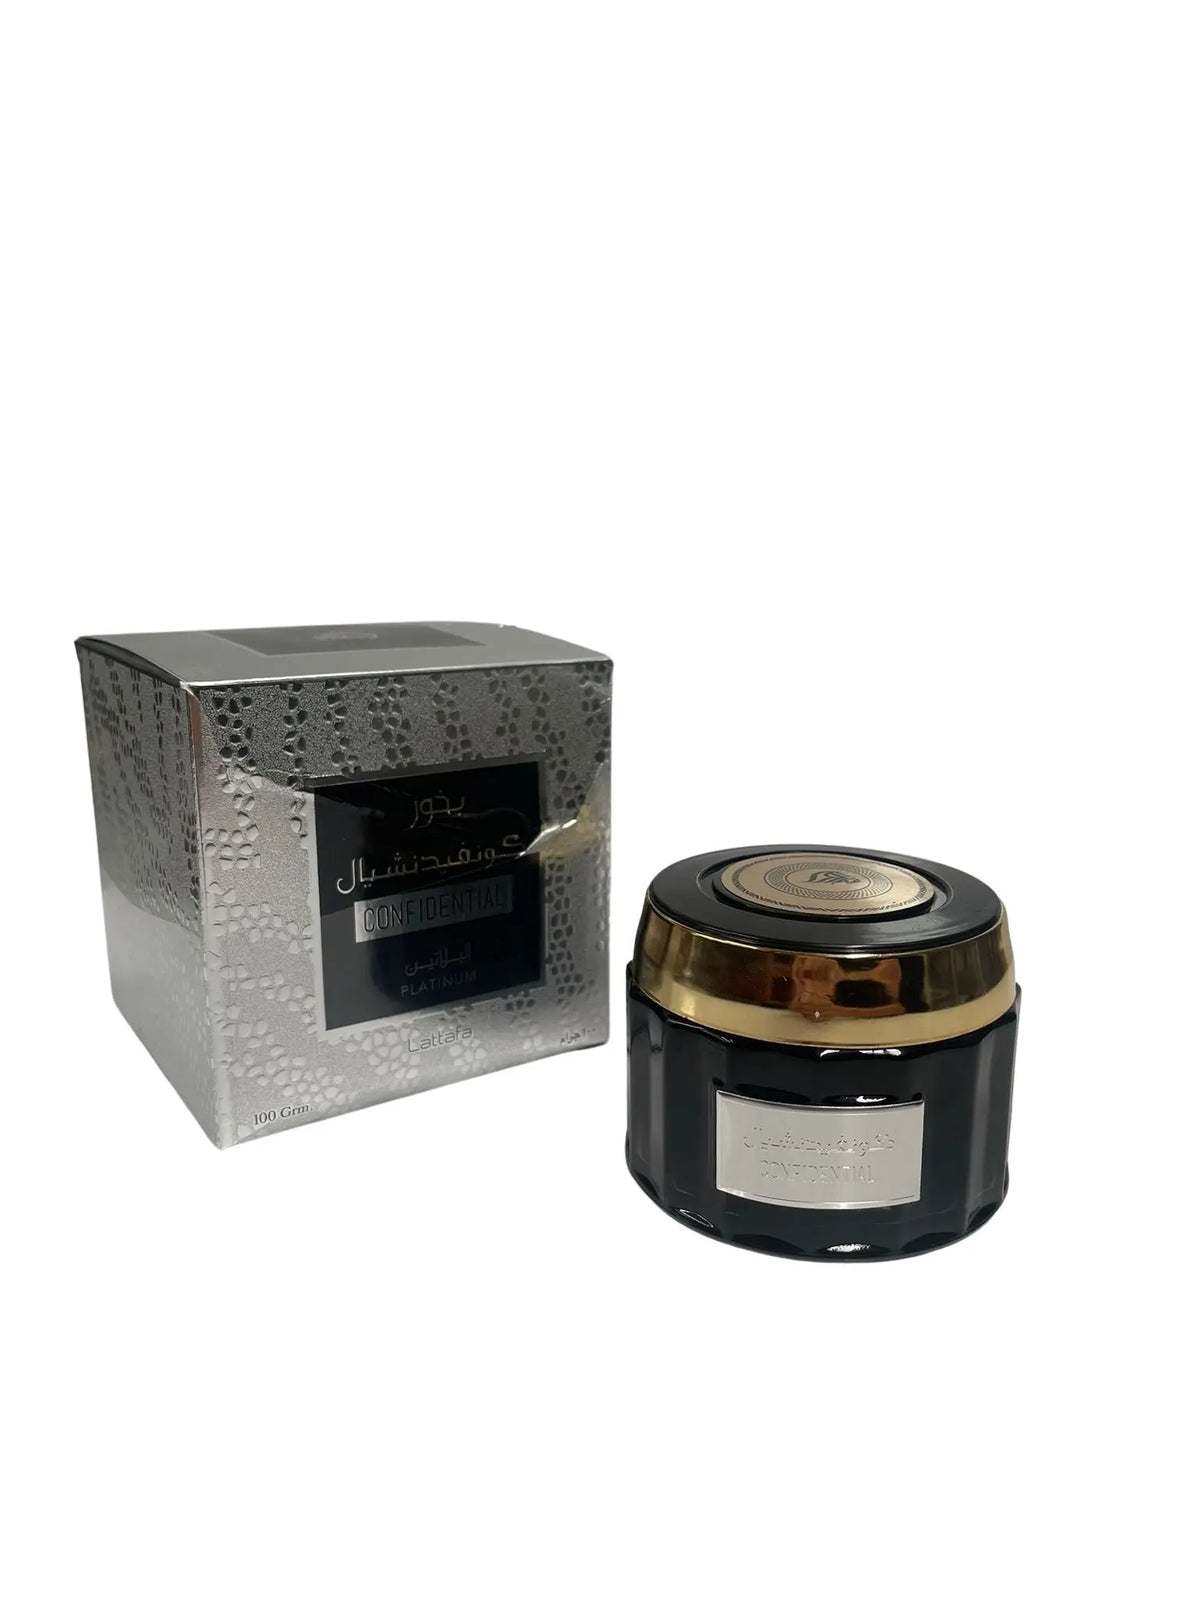 The image displays a product called "Confidential Platinum" by Lattafa, which appears to be a container of bakhoor, a type of scented bricks or powder used in the Middle East to perfume the home and clothing. The jar is black with a gold trim and label, and there is a matching box in the background with a silver and black design. The label on the box is partially visible and includes both Arabic and English text, indicating the dual-language branding.